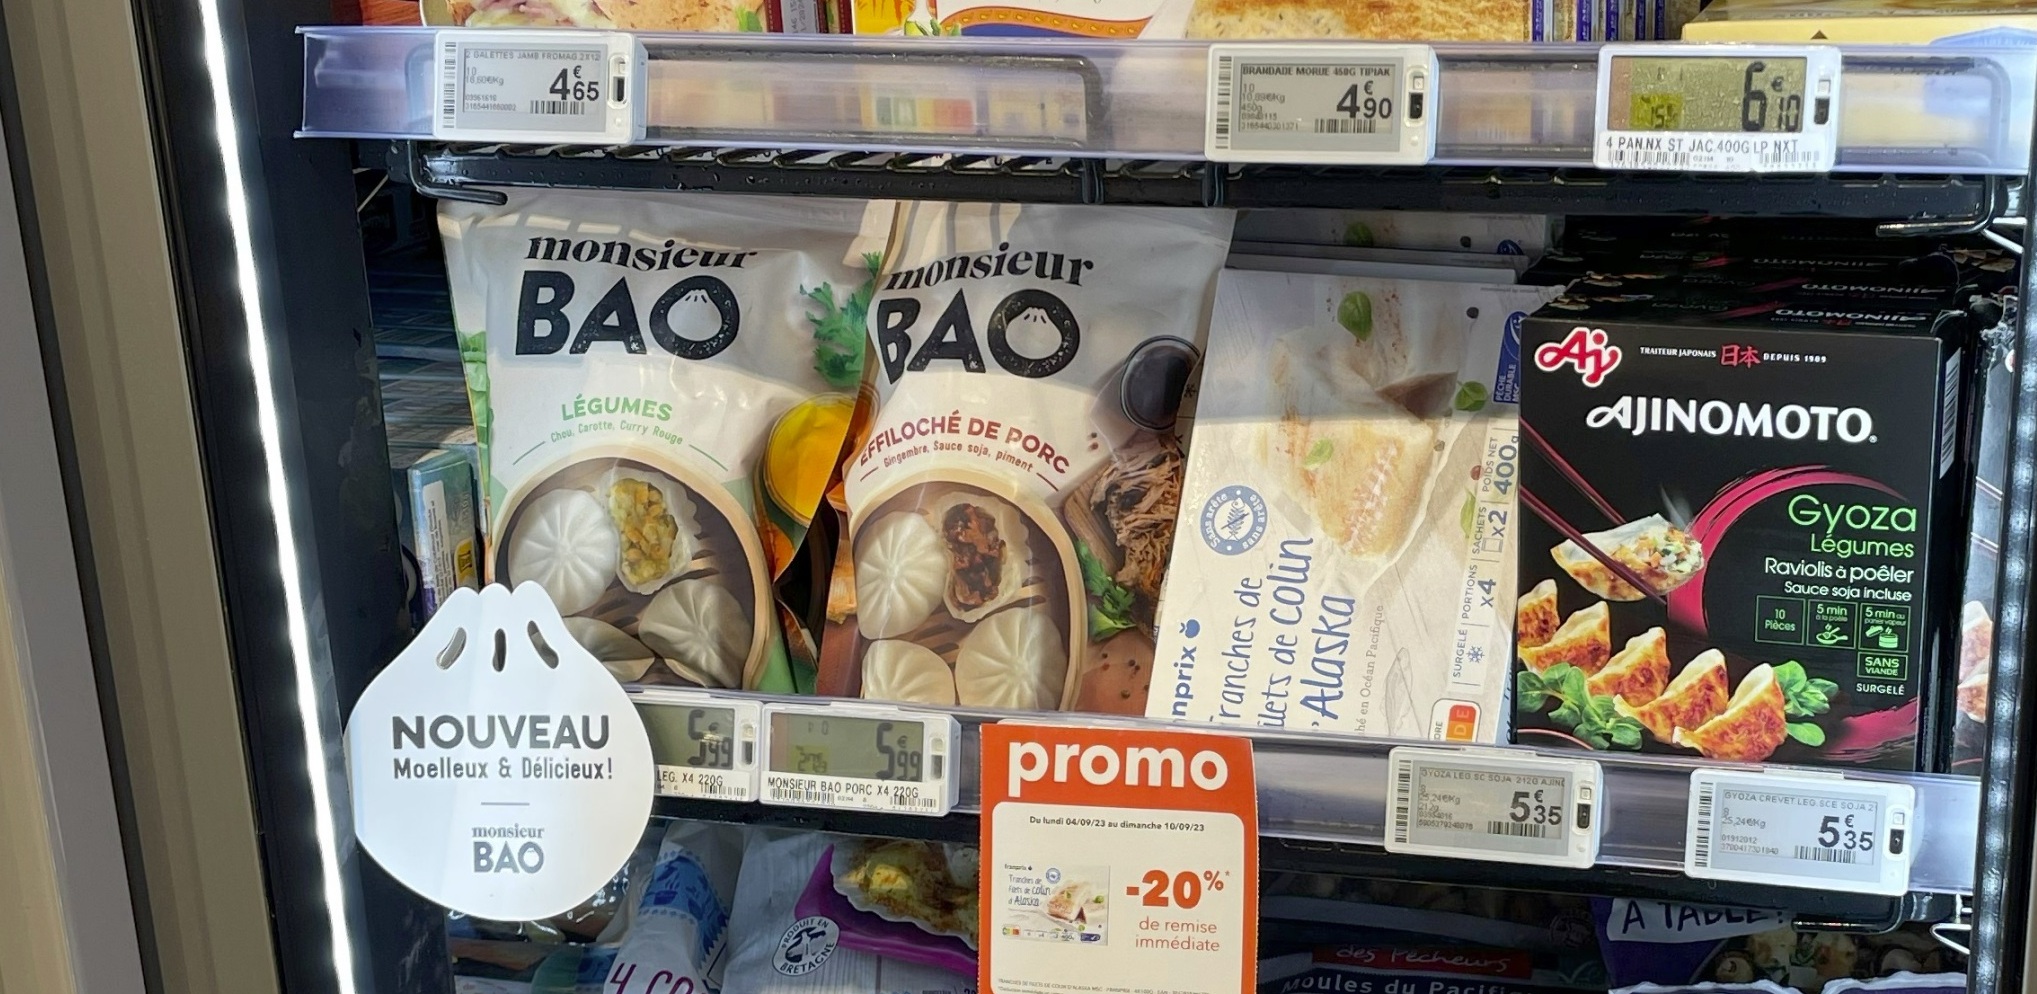 French baby-food firm Yooji raises more cash, names new CEO - Just